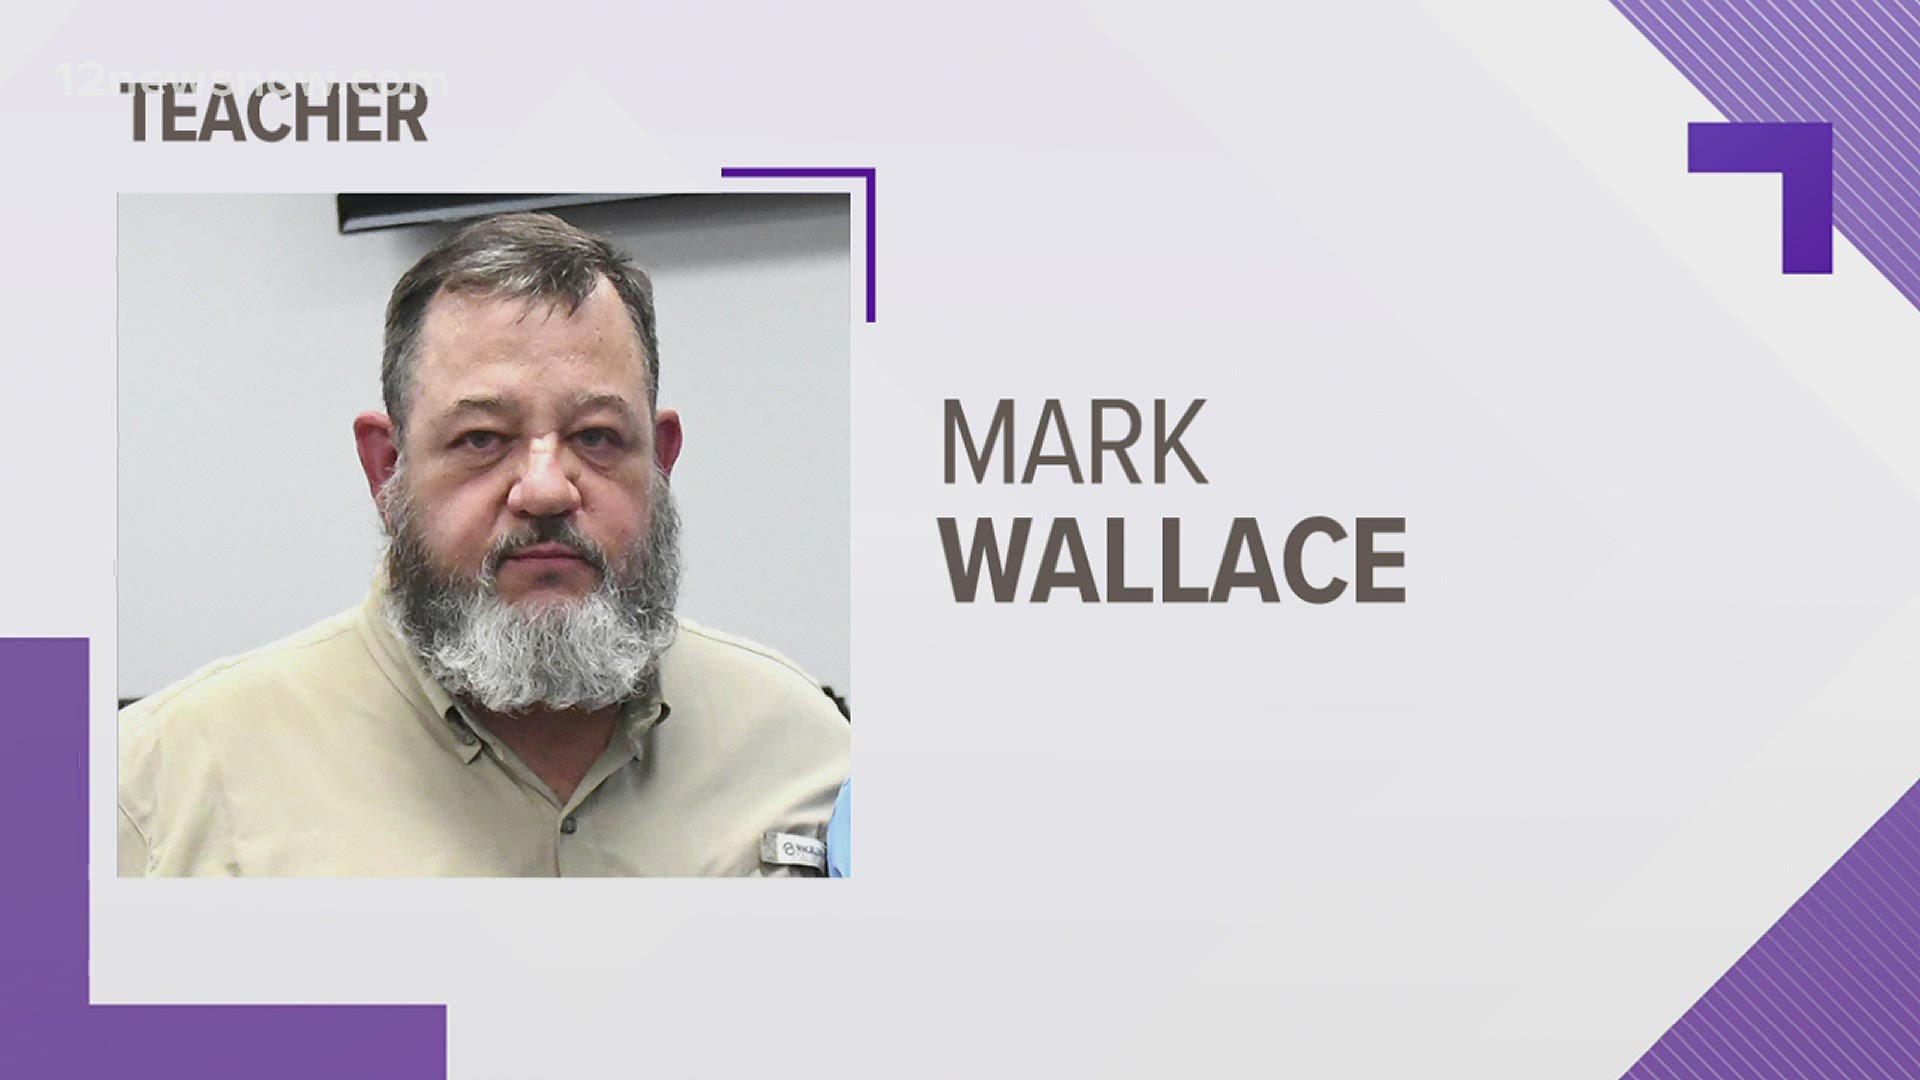 Mark Wallace was hit and killed in motorcycle crash over the weekend